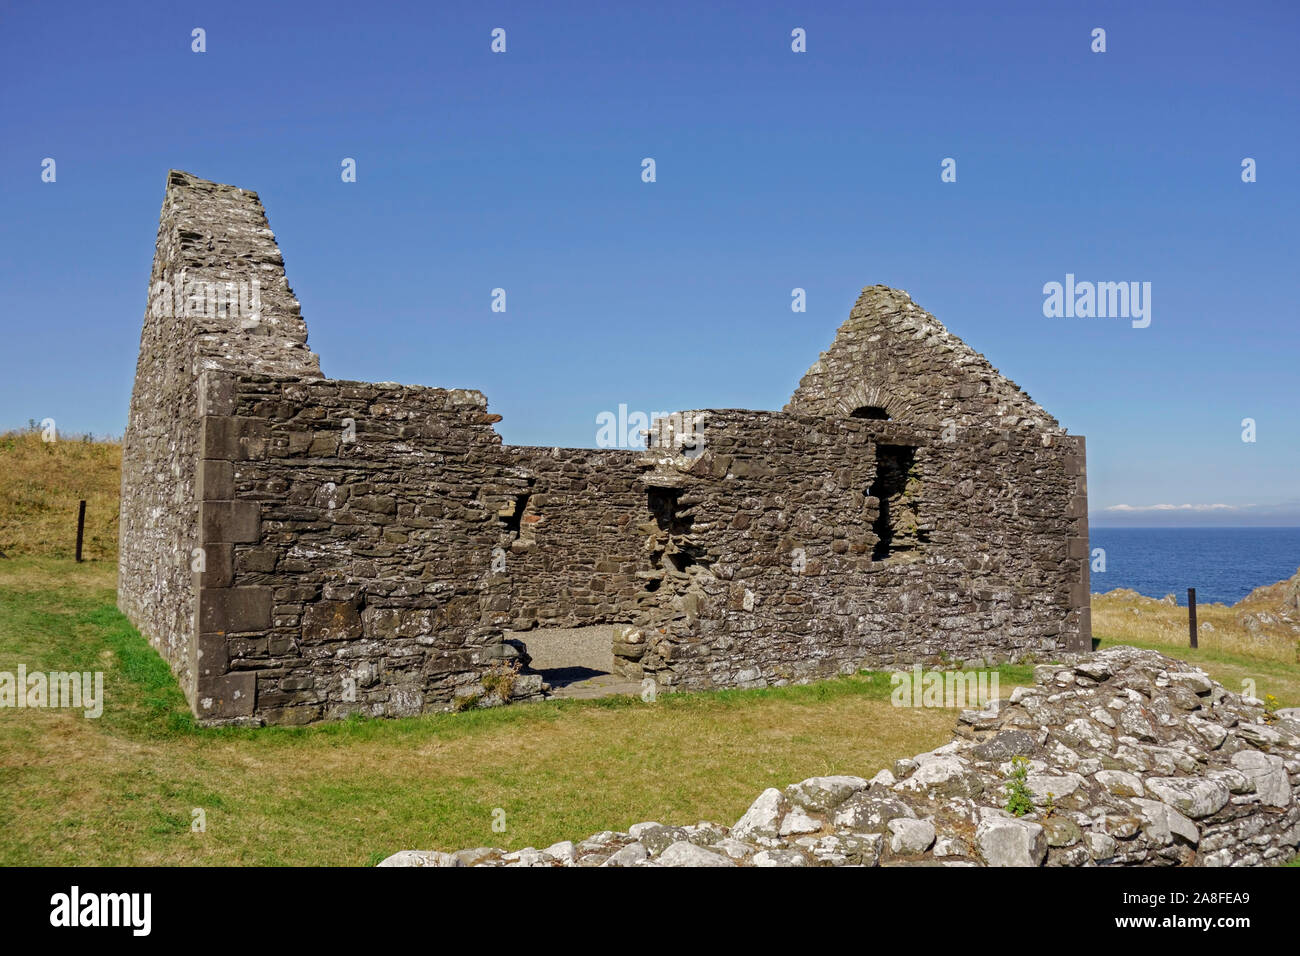 San Ninian's Chapel, Isola di Whithorn, Wigtownshire, Dumfries and Galloway, Scotland, Regno Unito Foto Stock